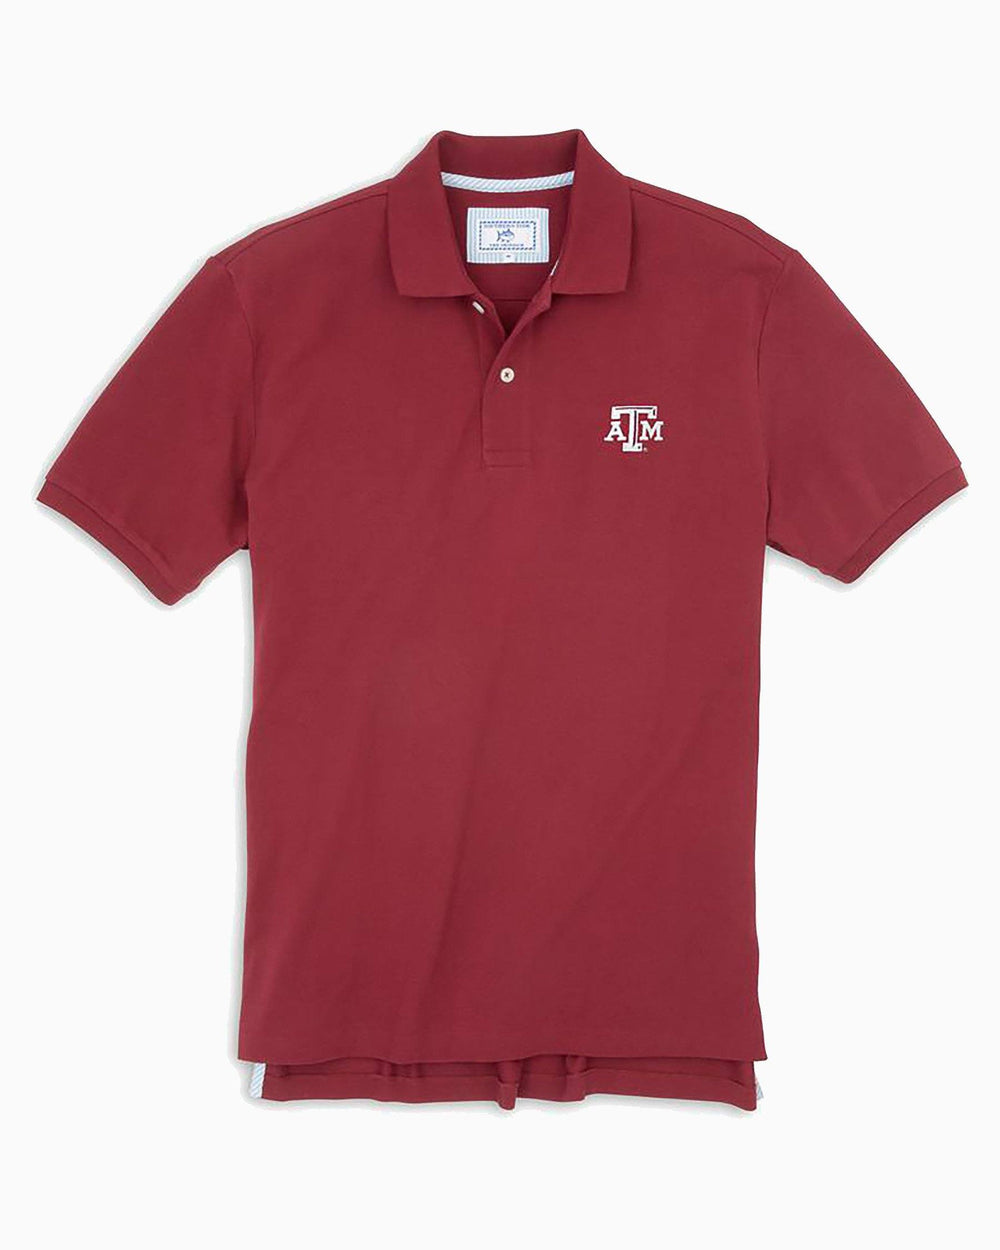 The front view of the Men's Red Texas A&M Aggies Pique Polo Shirt by Southern Tide - Chianti